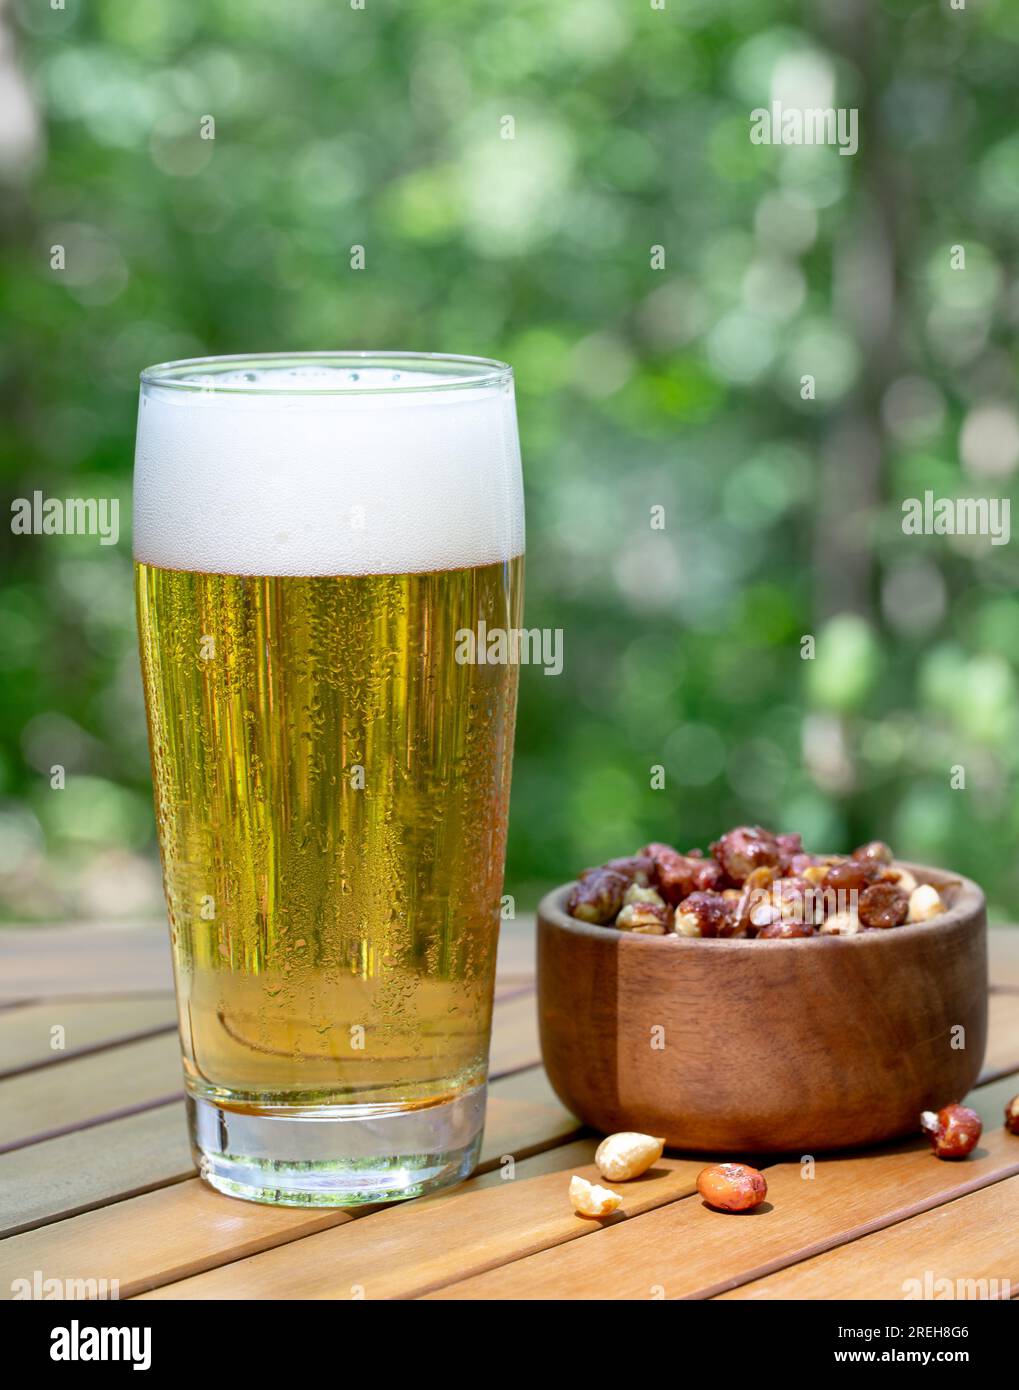 Glass of beer and bowl of nuts outdoors on wooden patio table with nature background Stock Photo